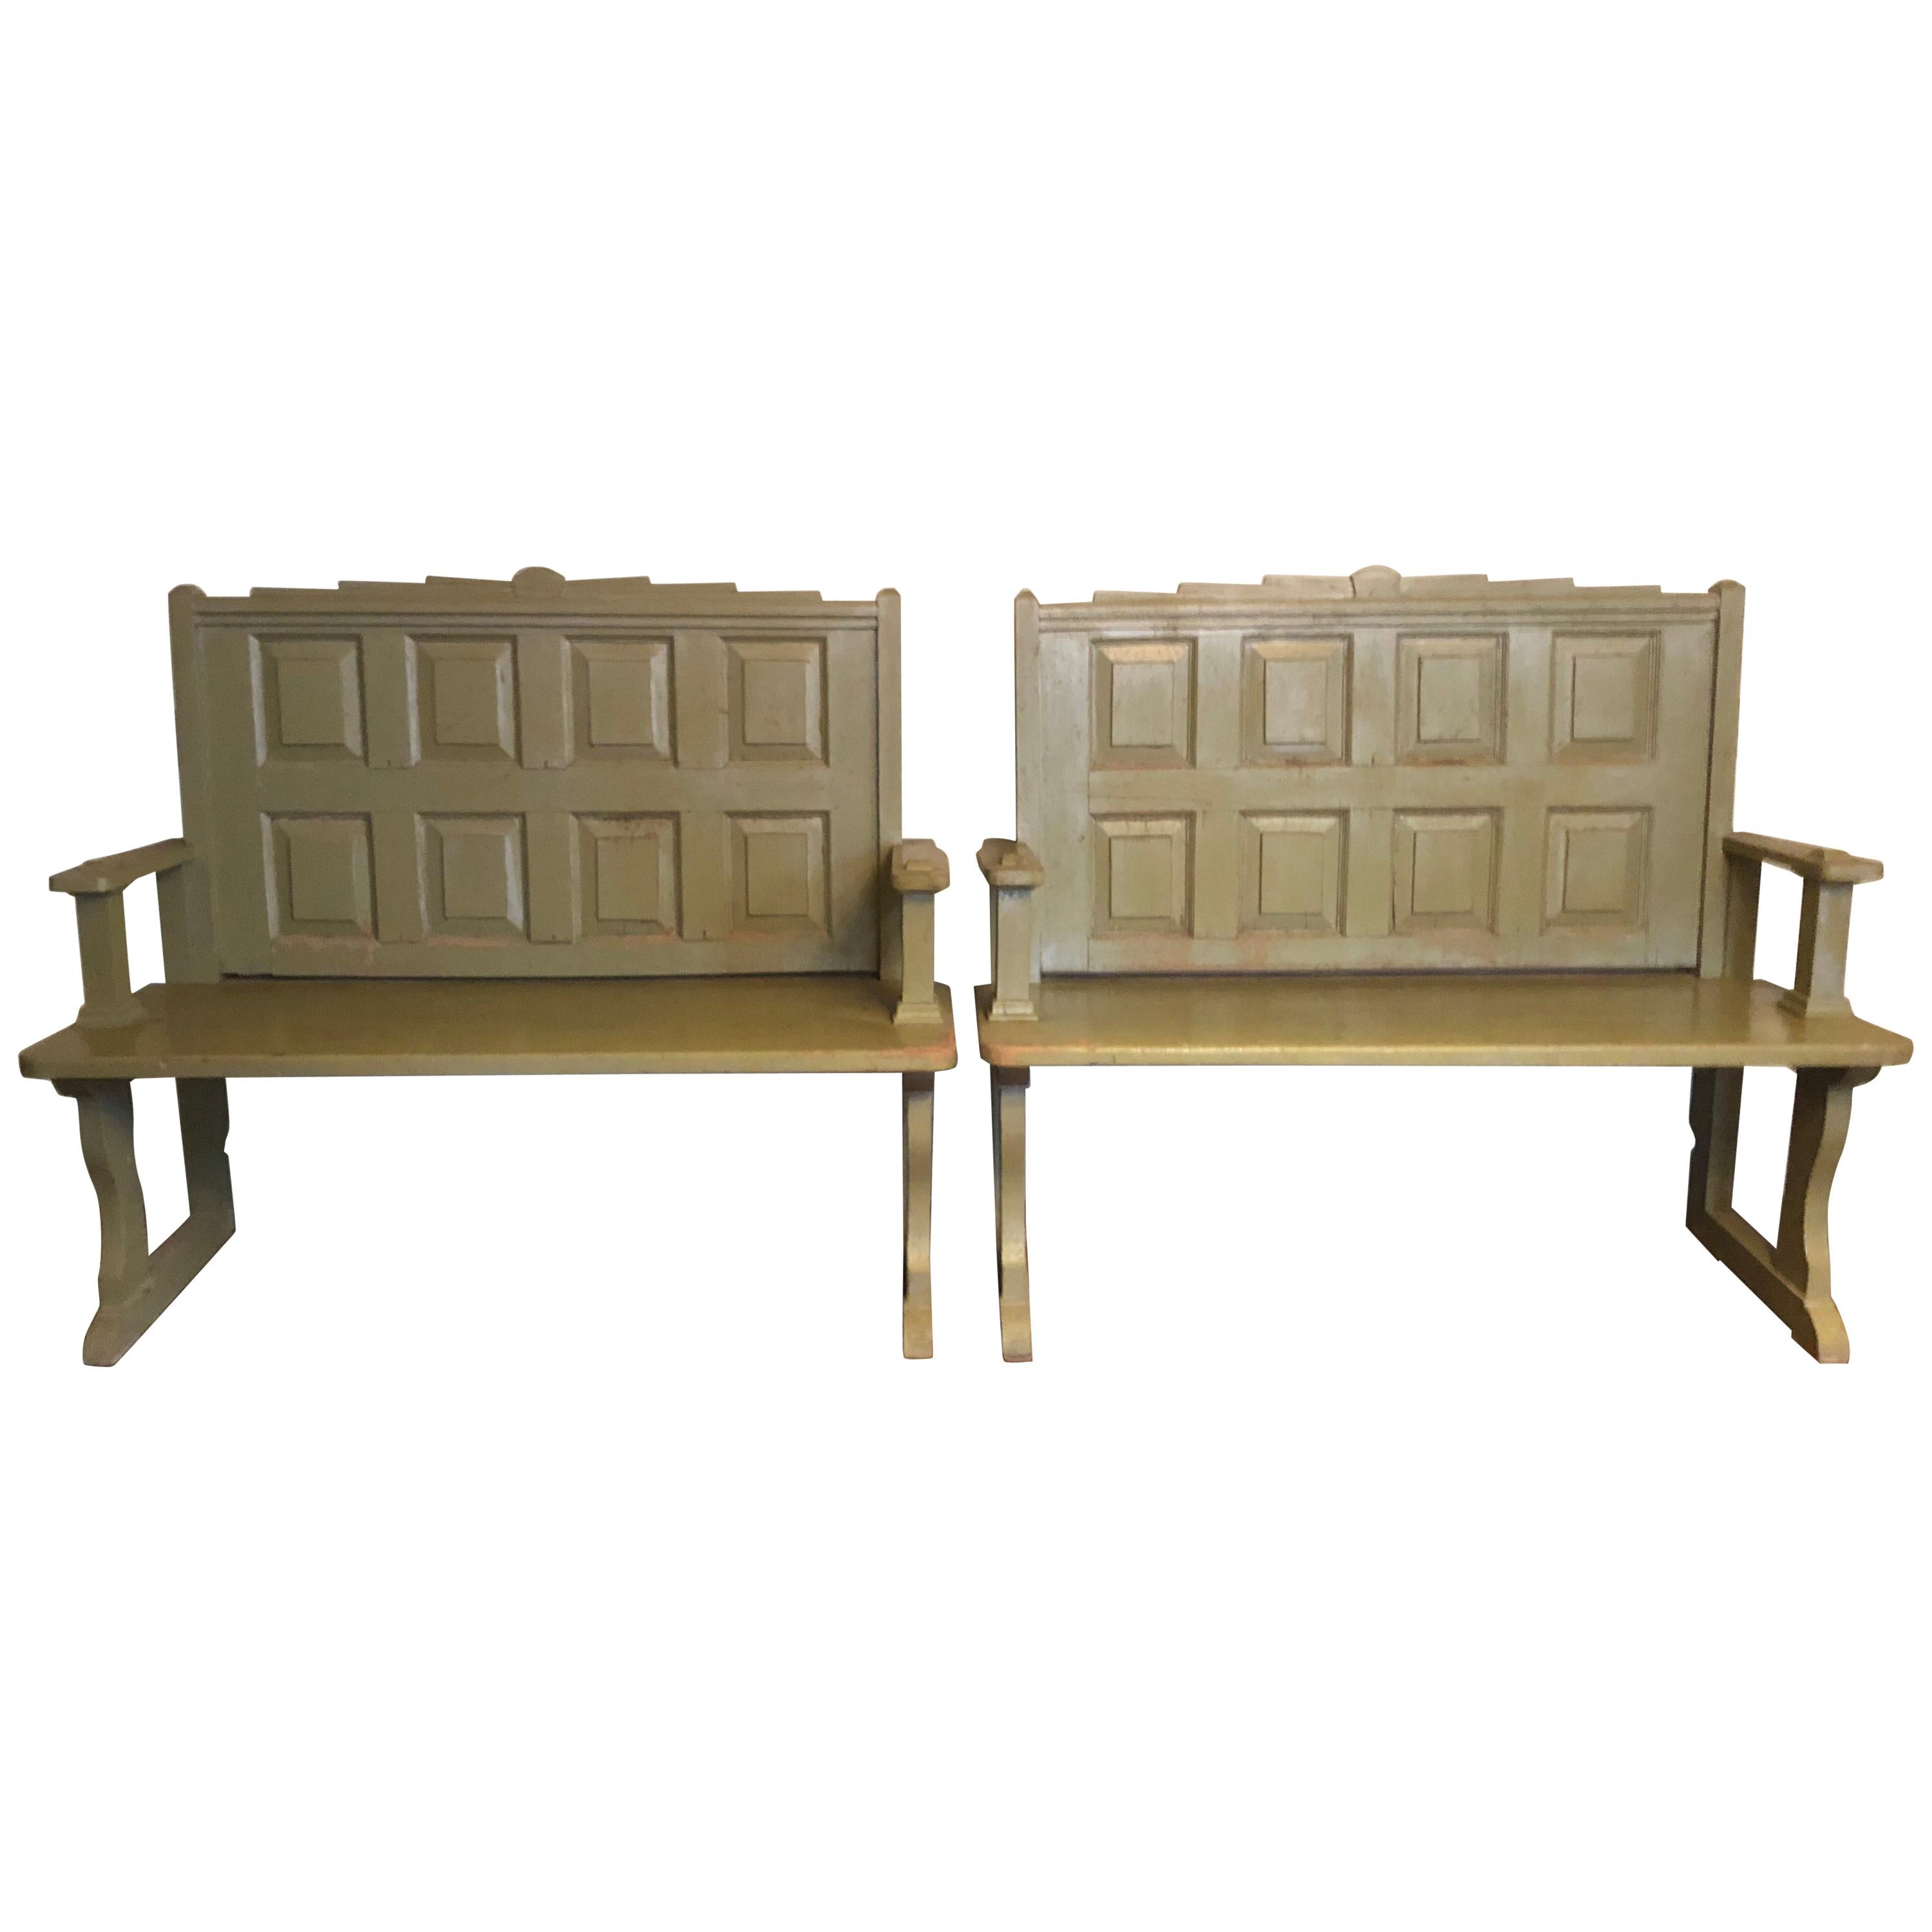 Pair of Olive Painted Hall Benches